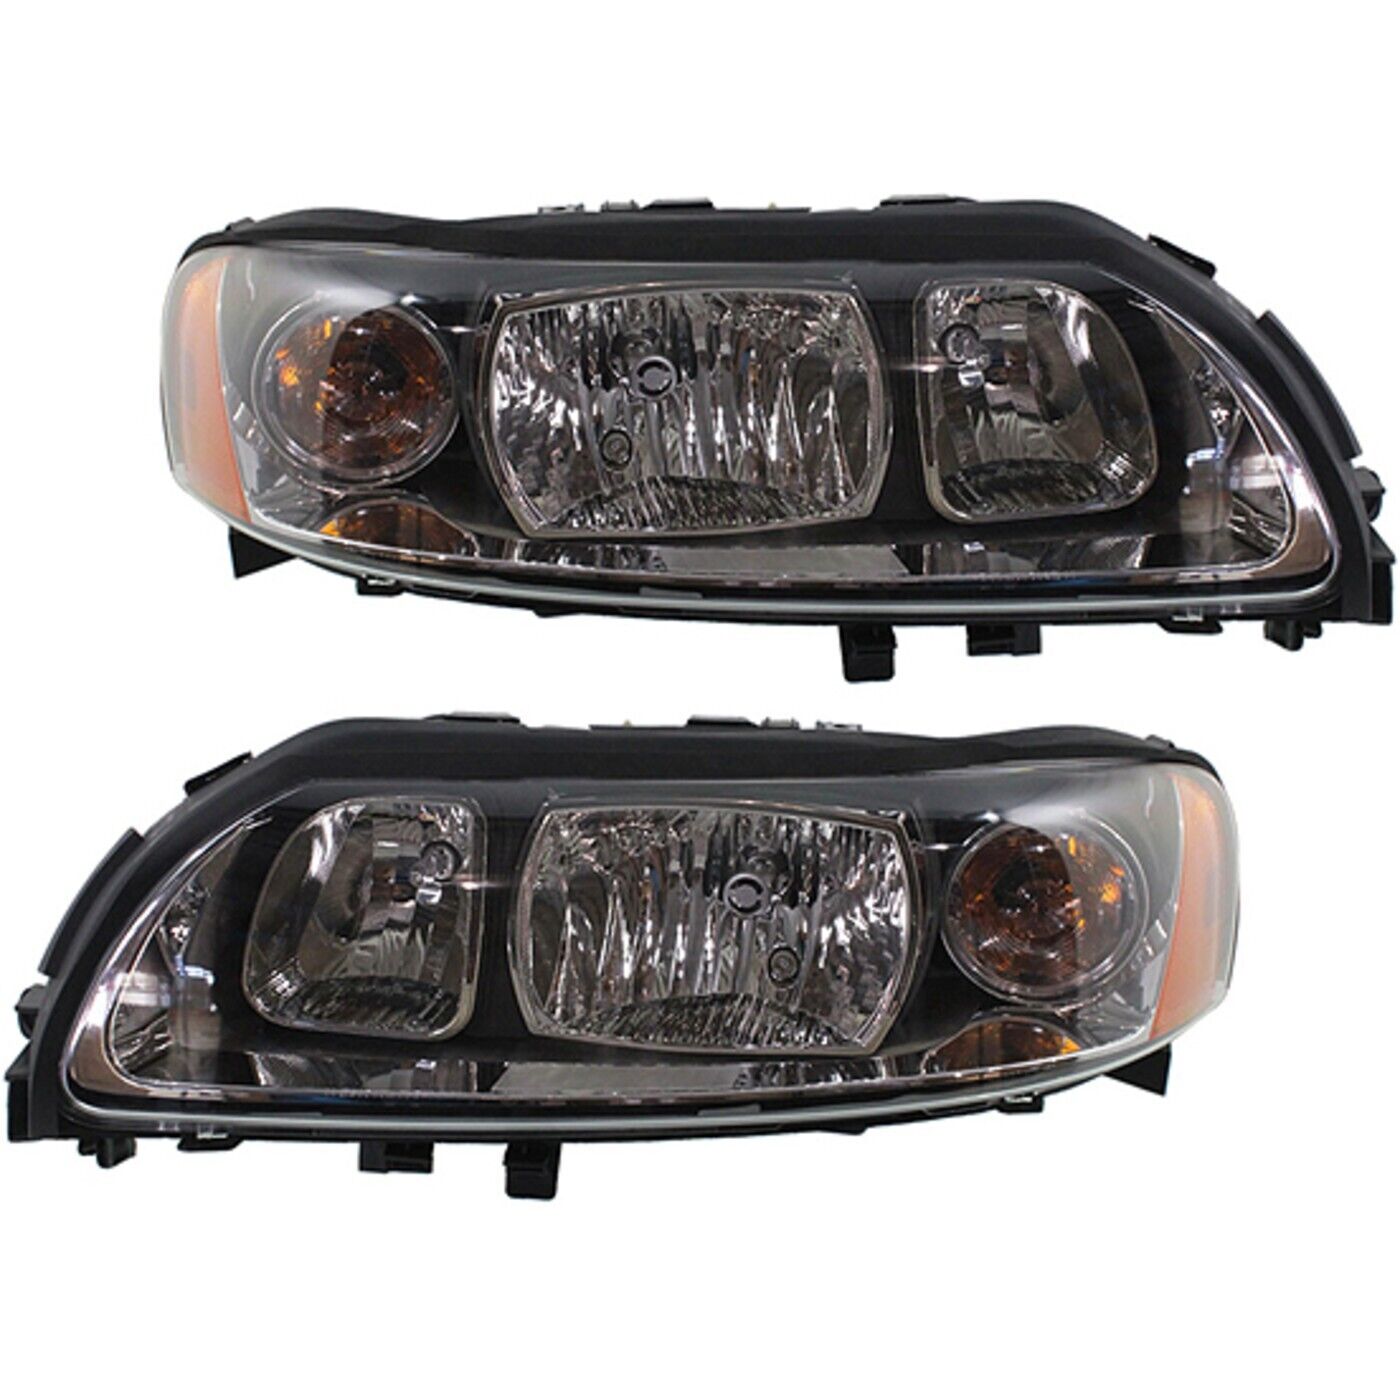 Headlight Set For 2005-2009 Volvo S60 Left and Right Headlamp With Bulb 2Pc